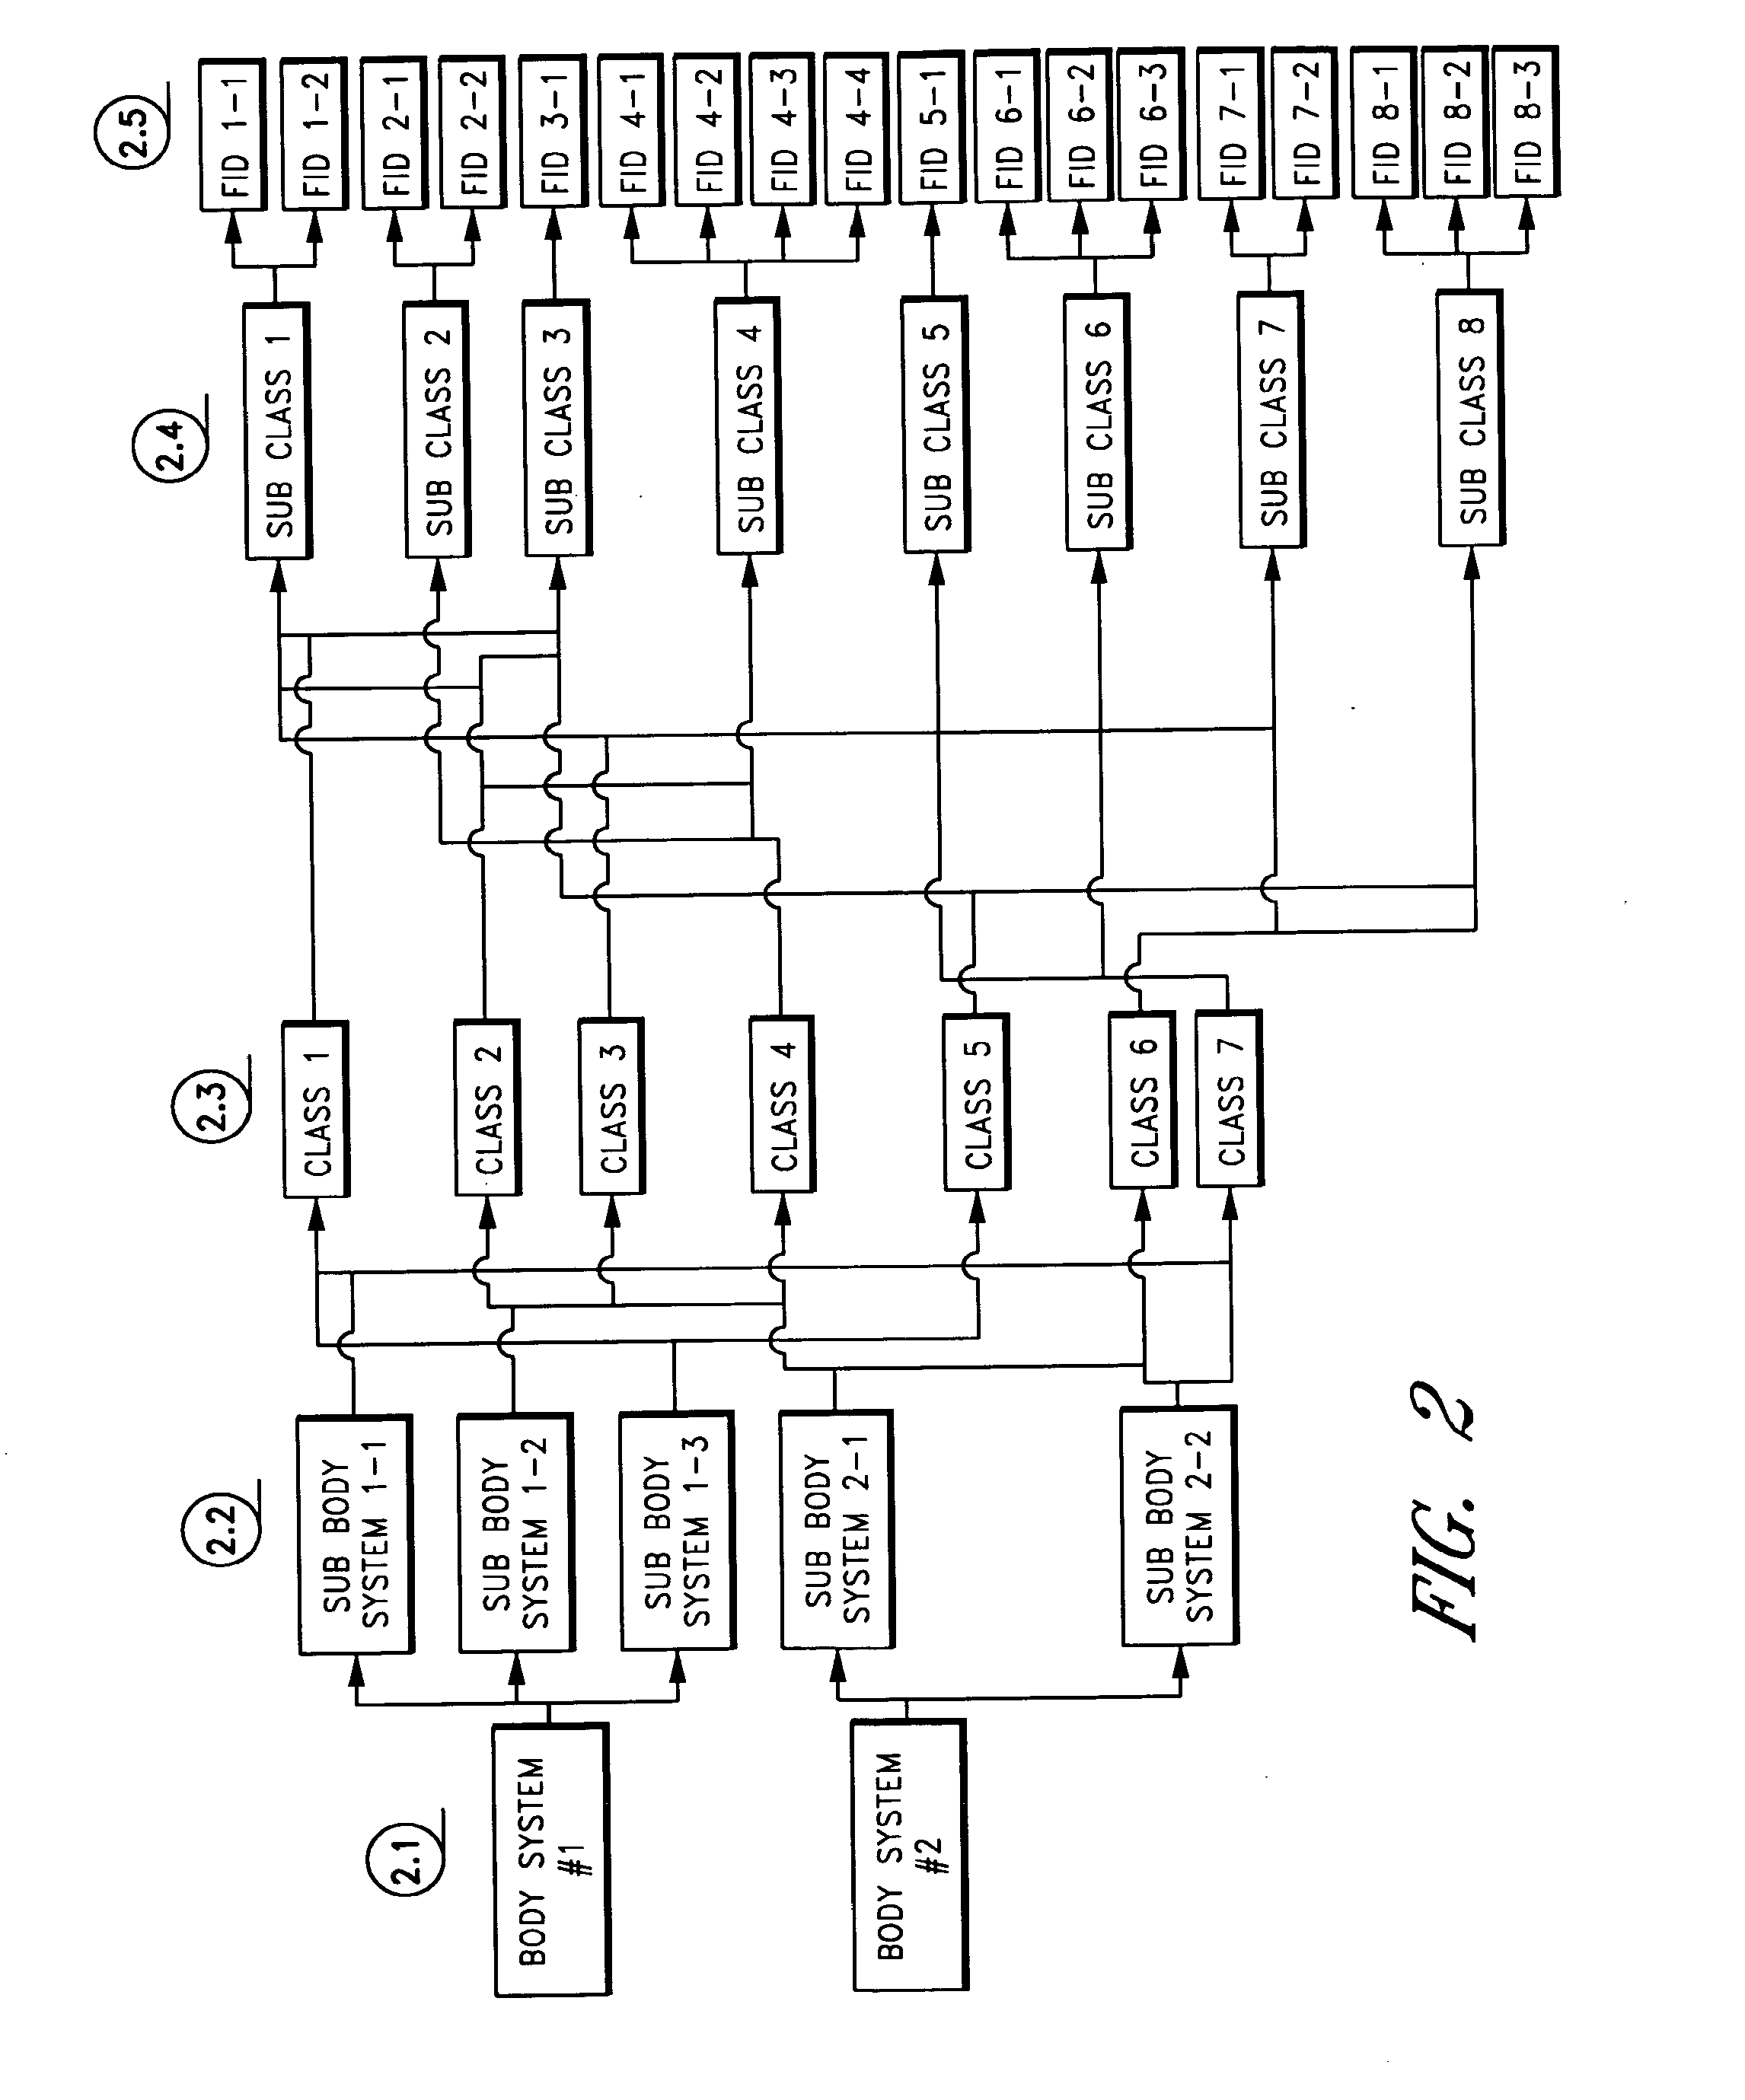 Systems and methods for processing medical data for employment determinations